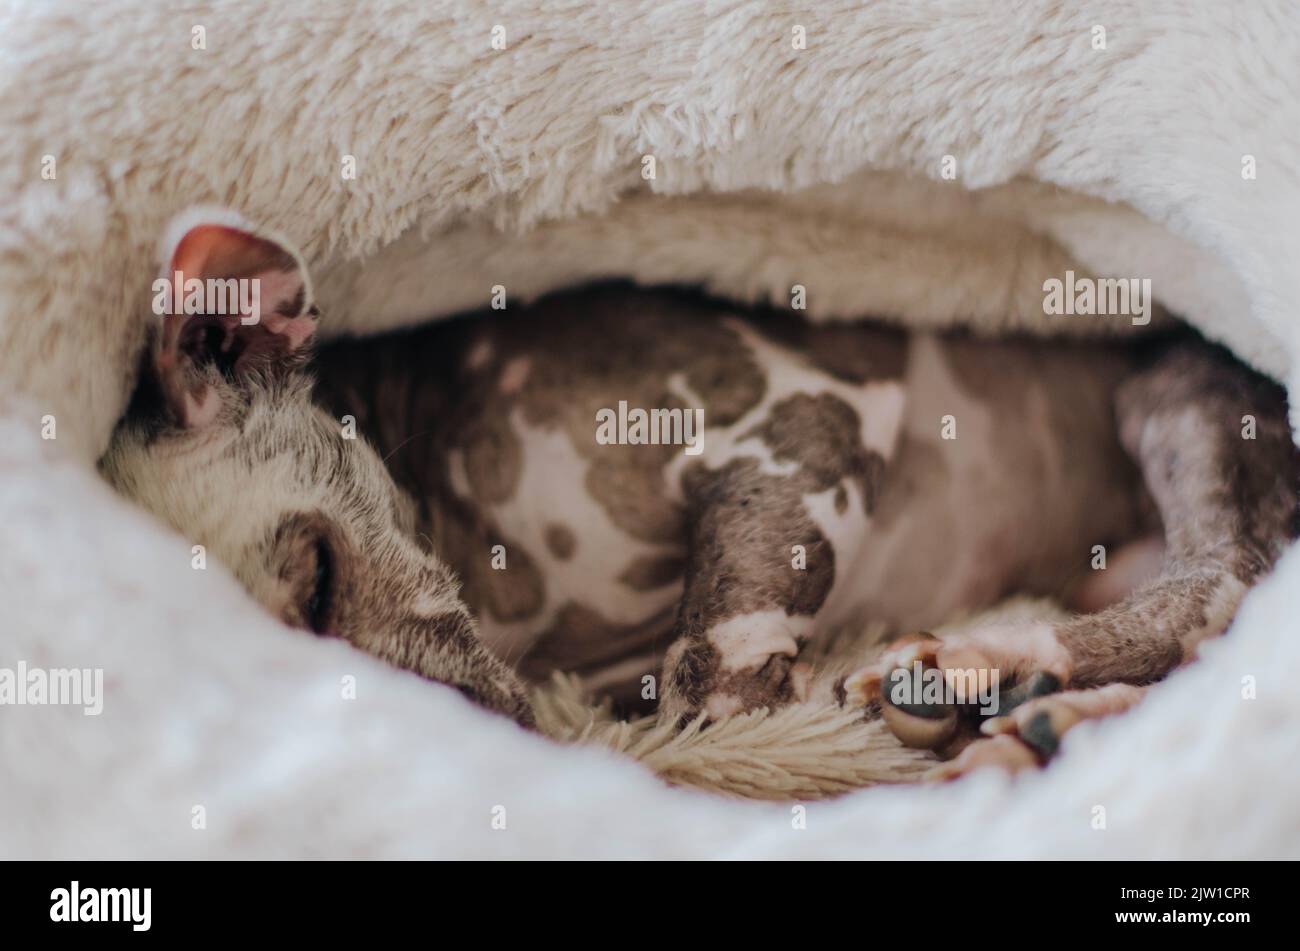 Chinese crested hairless sleeping inside a nest Stock Photo